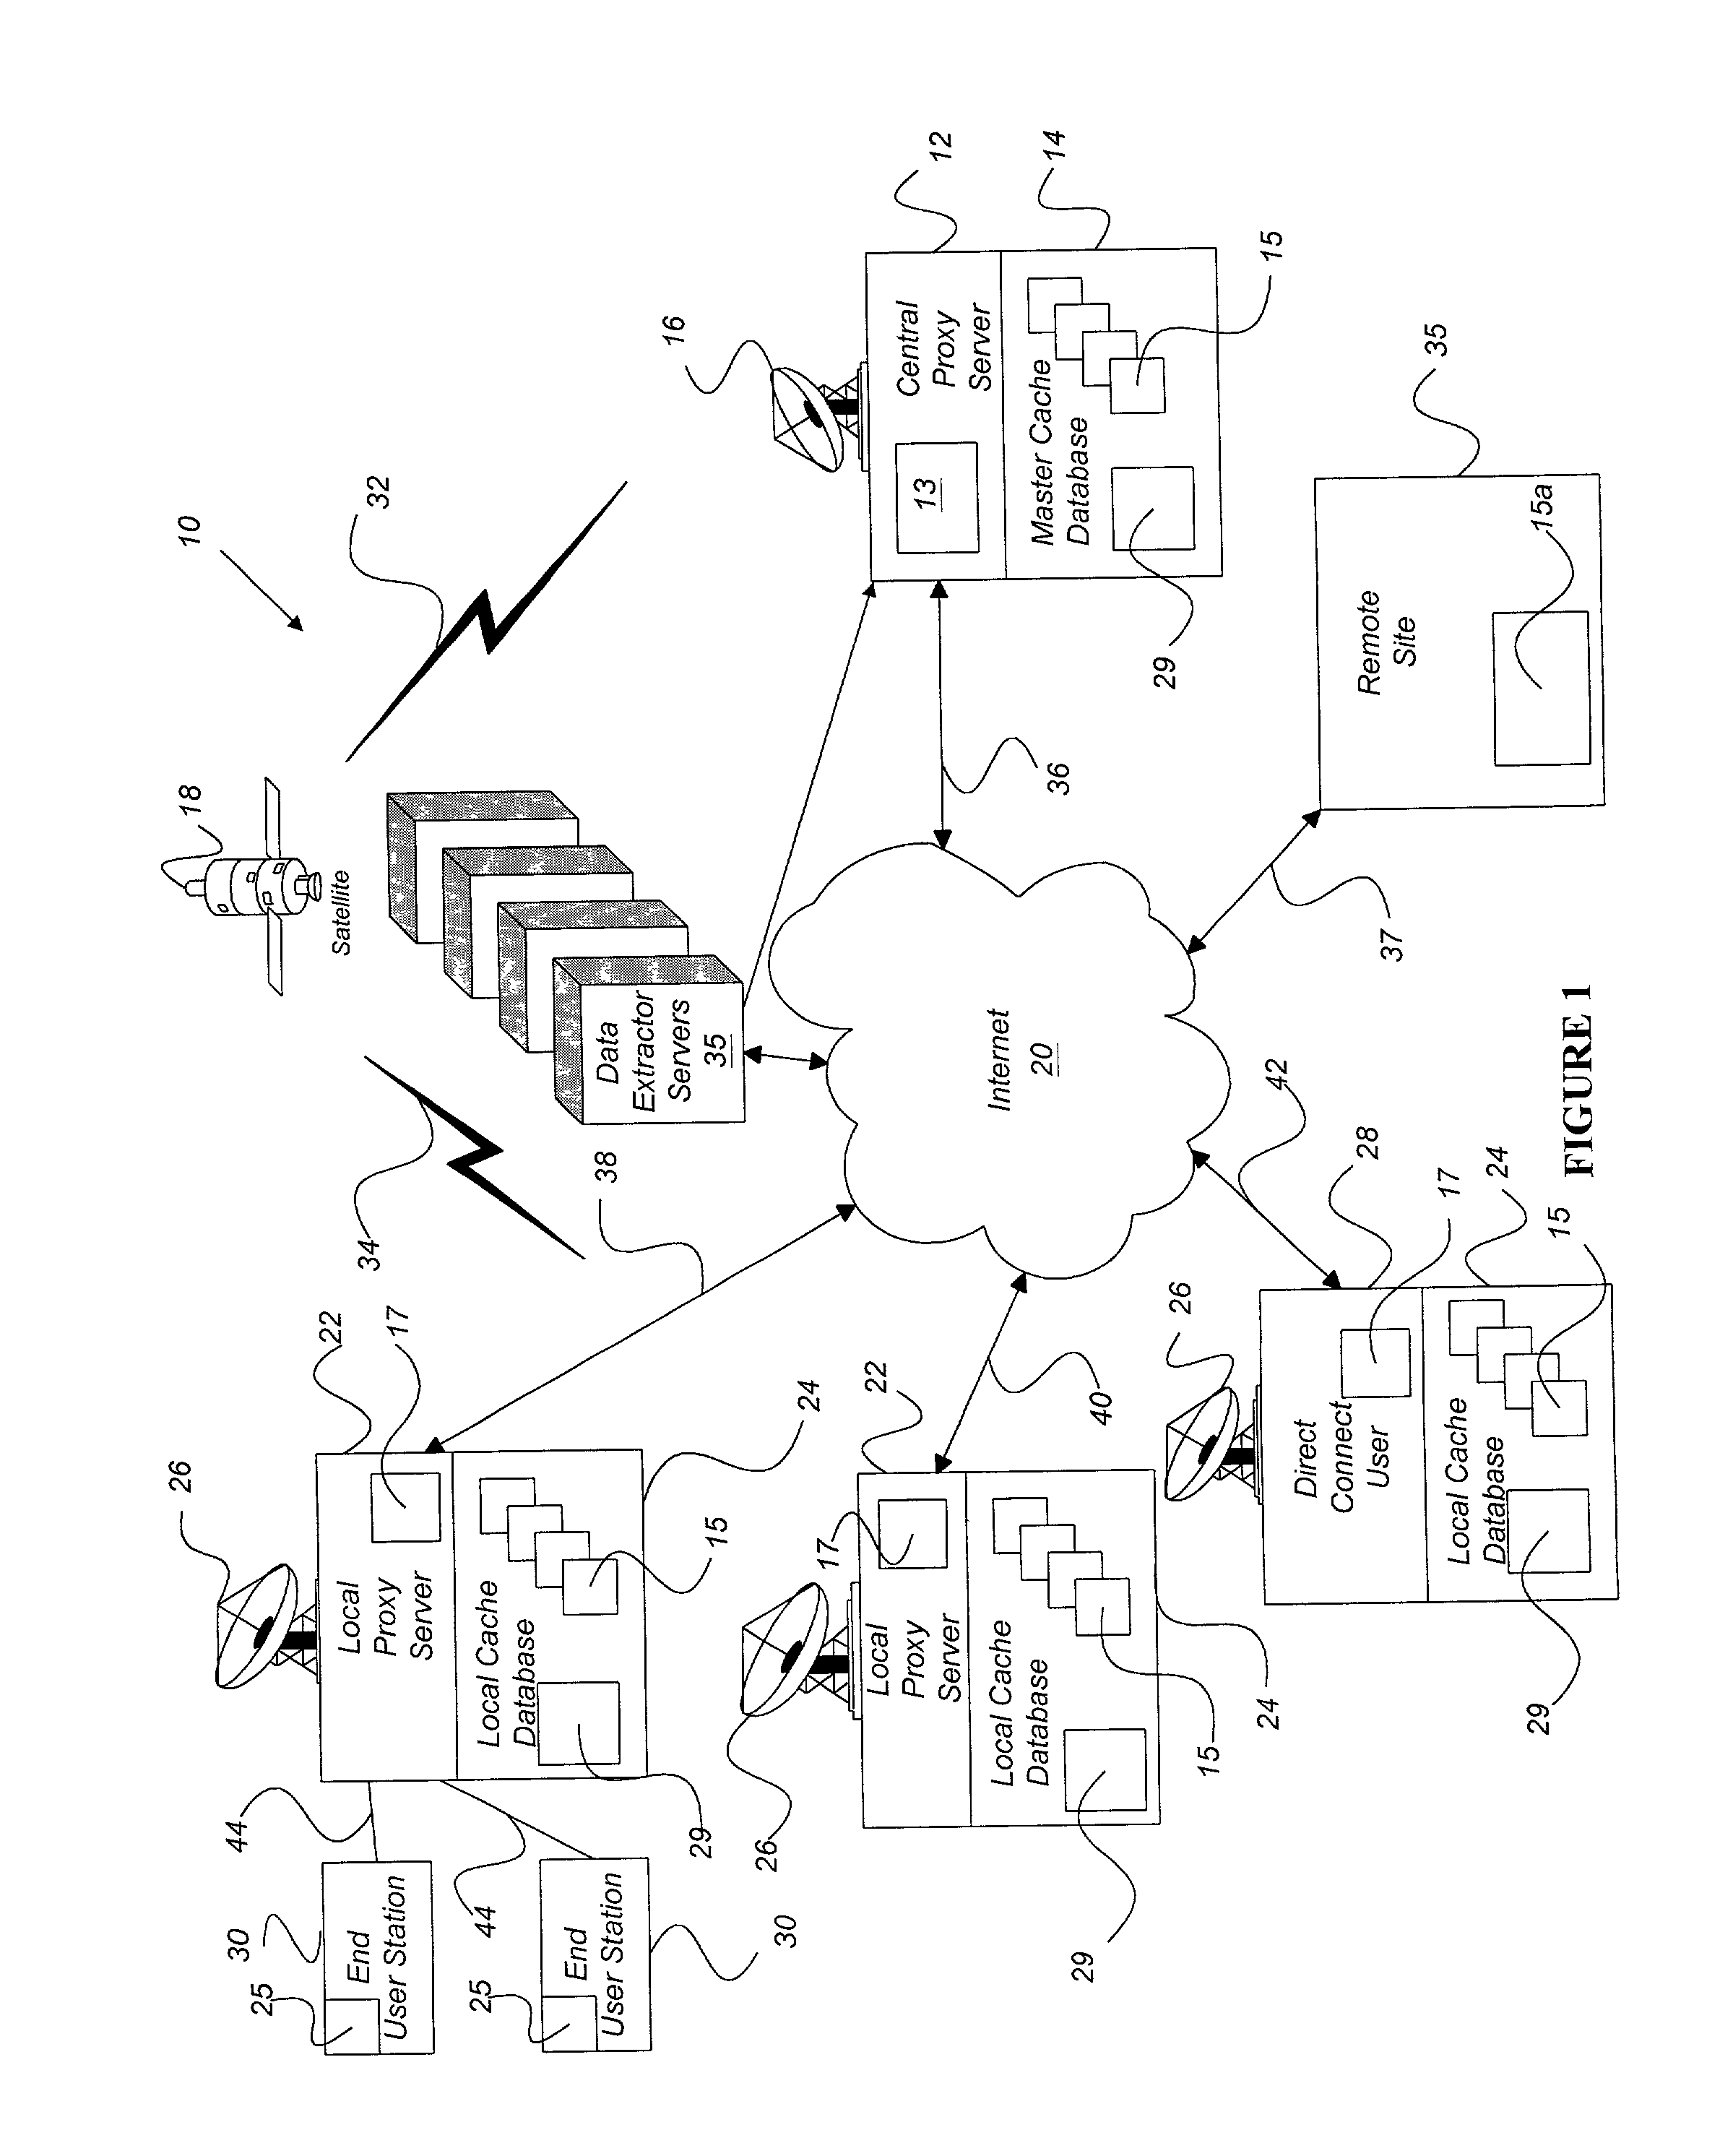 Internet content delivery acceleration system employing a hybrid content selection scheme